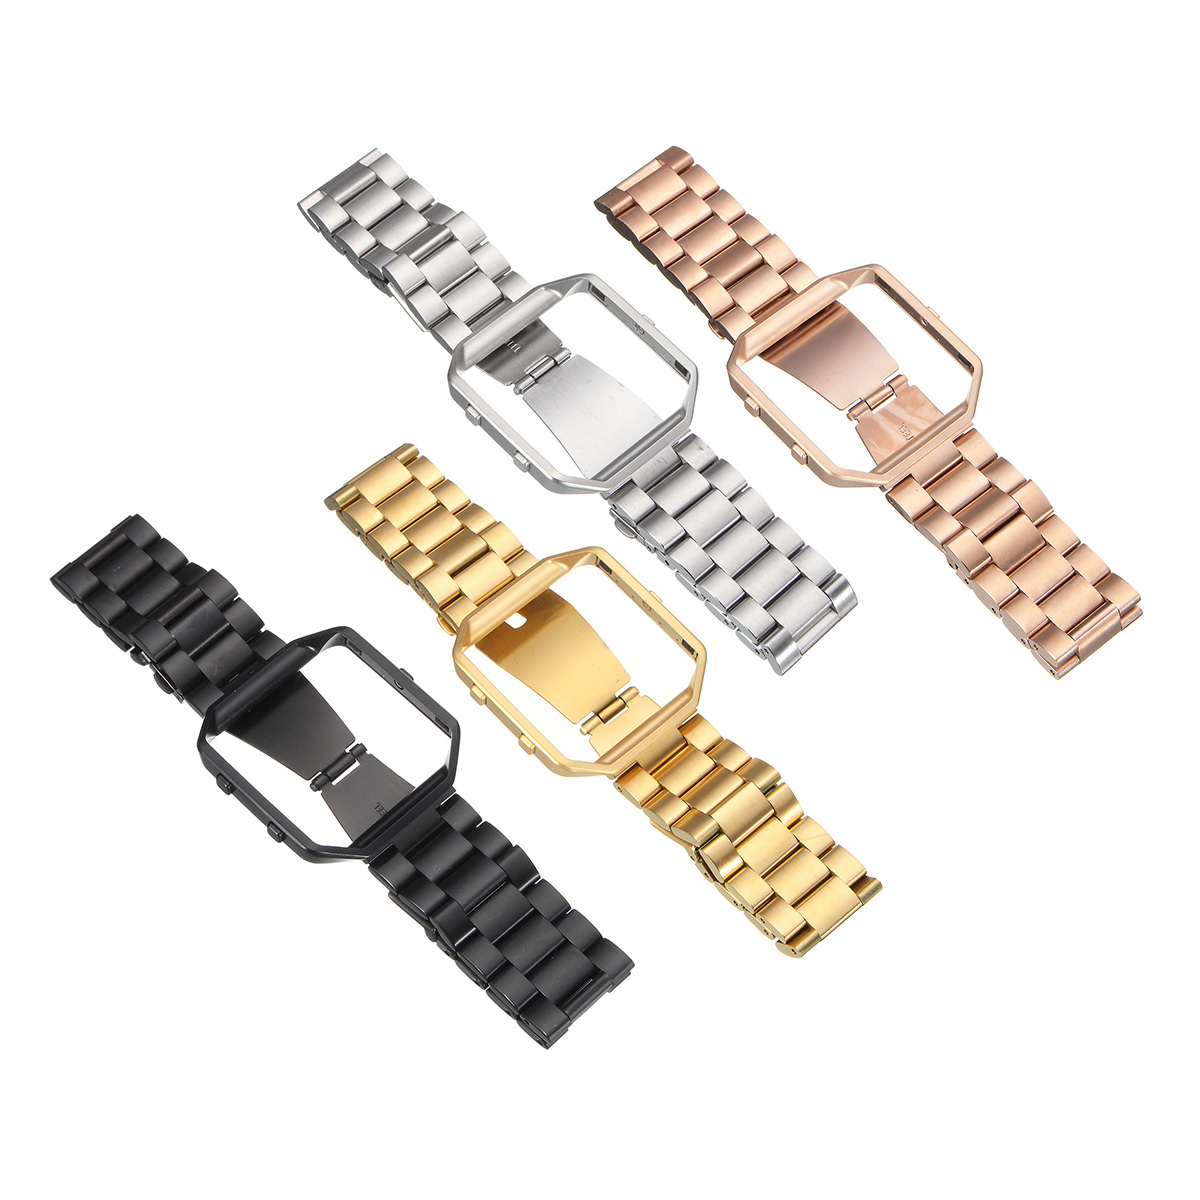 Bakeey-Steel-Metal-Frame-Watch-Case-Cover-Frame-Watch-Band-For-Fitbit-Blaze-Watch-1639063-5